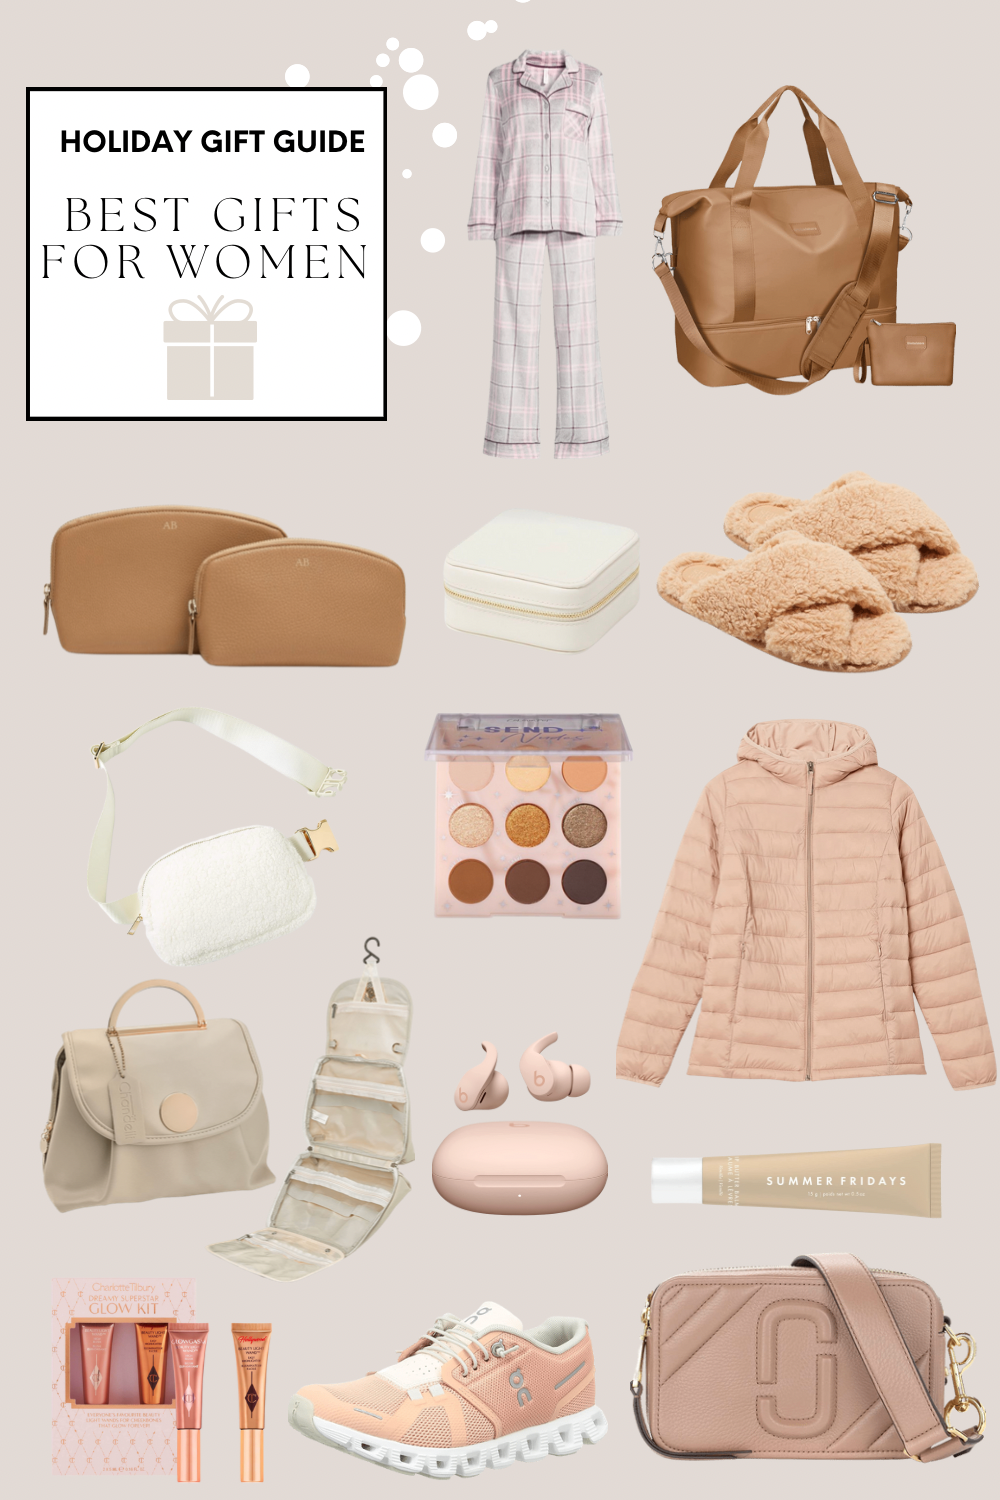 Best Holiday Gifts for Women in 2022 - Affordable by Amanda